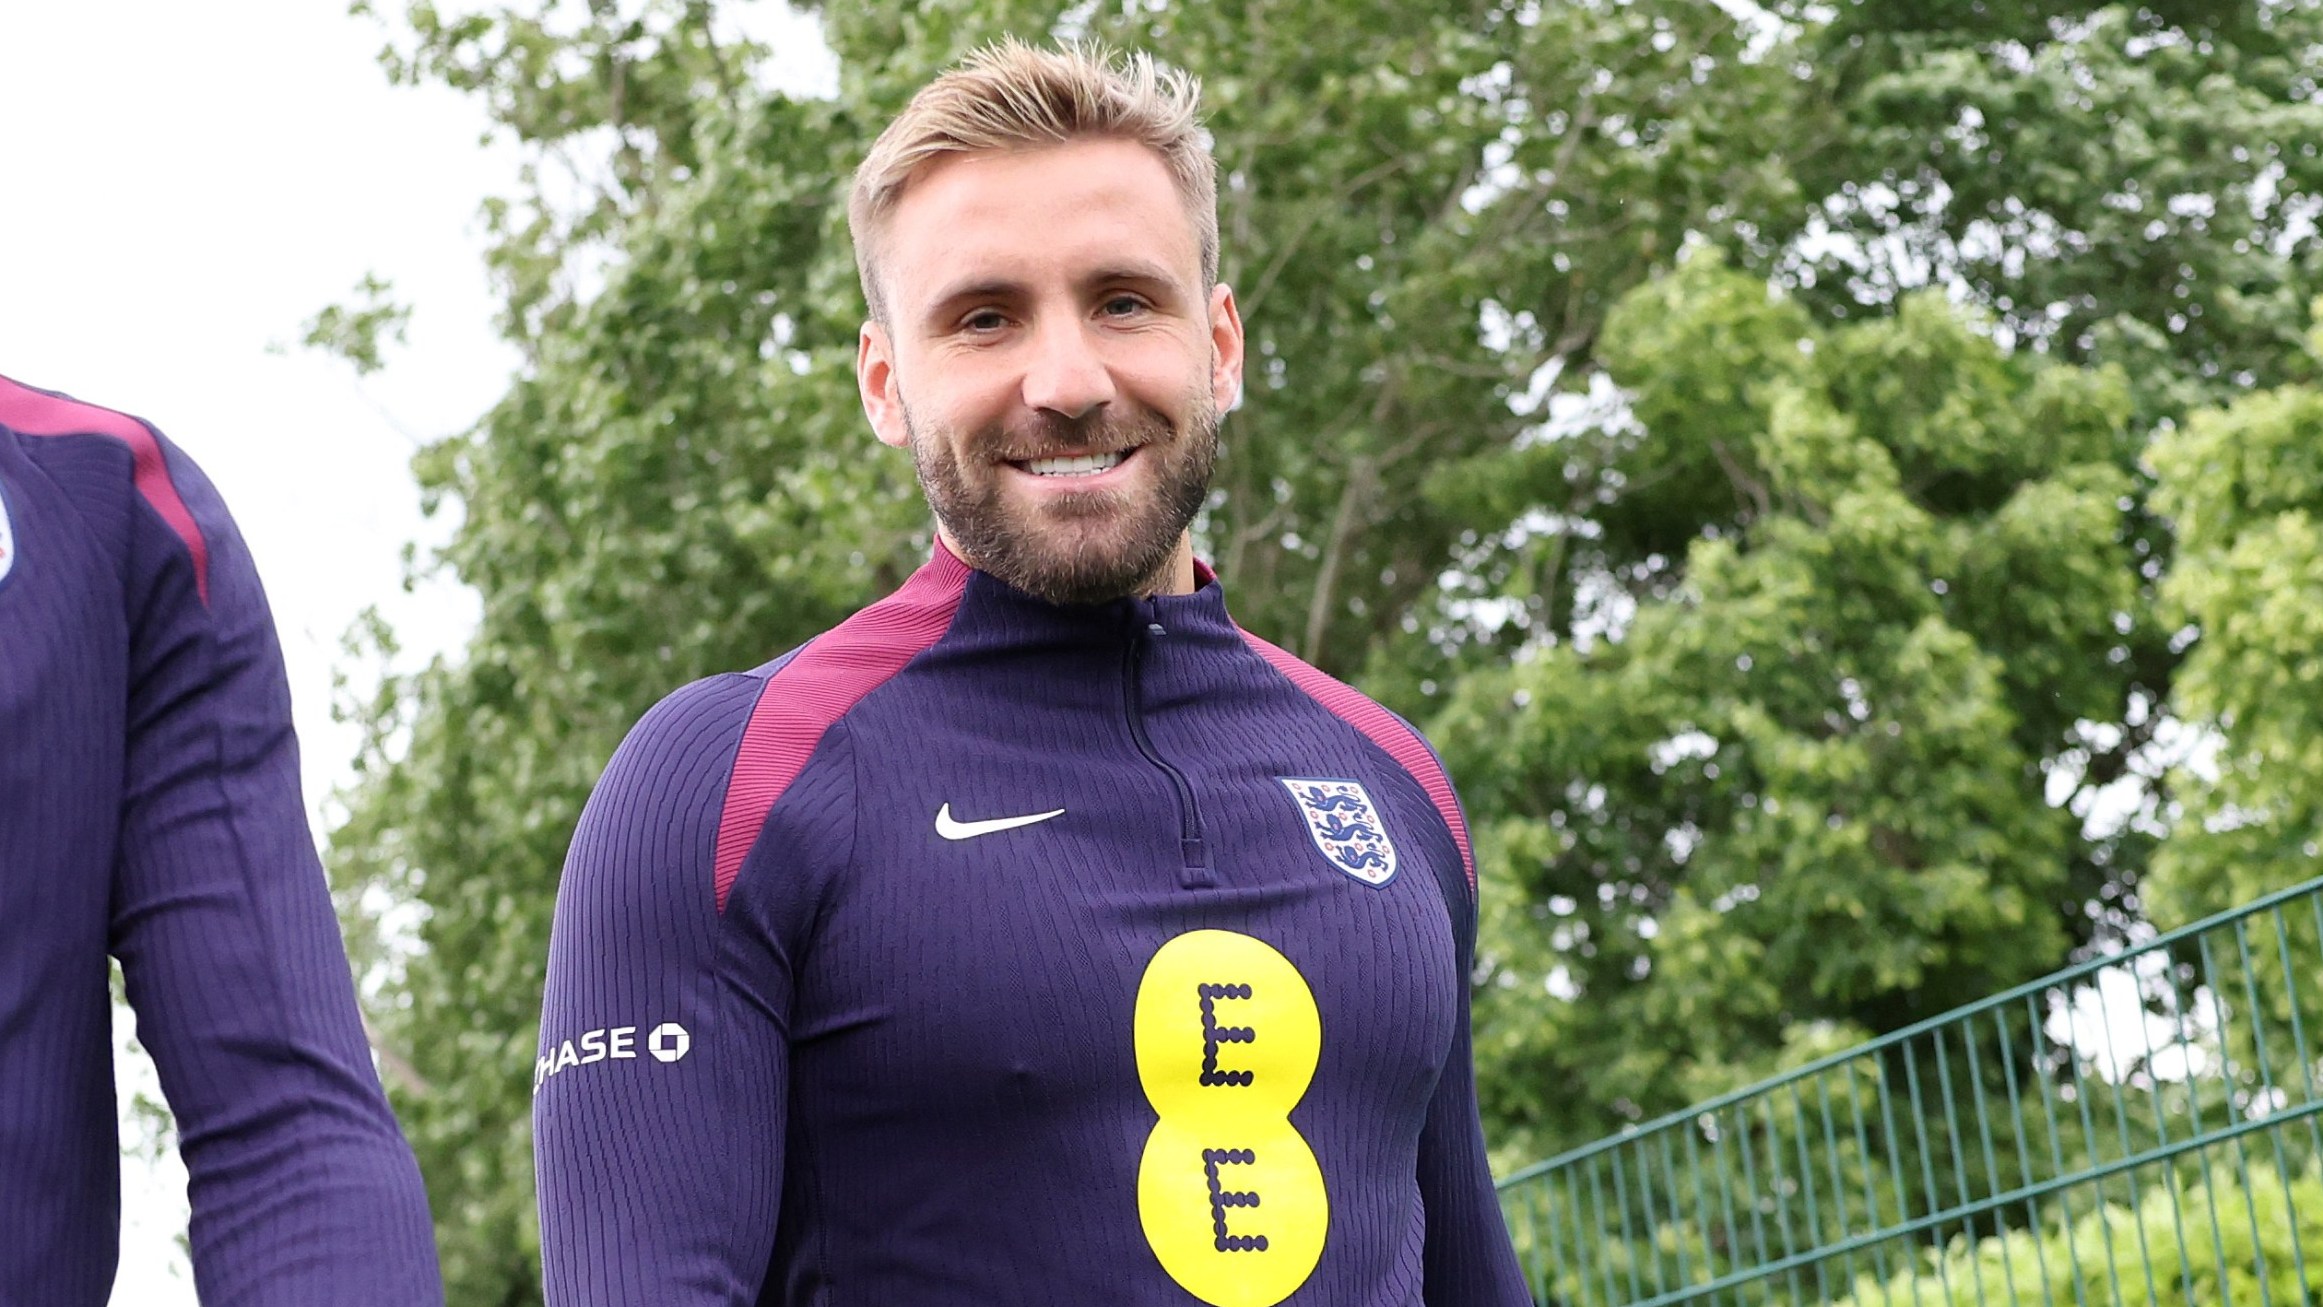 Shaw looks in good spirits after returning to training with England – he hasn’t played since February 18